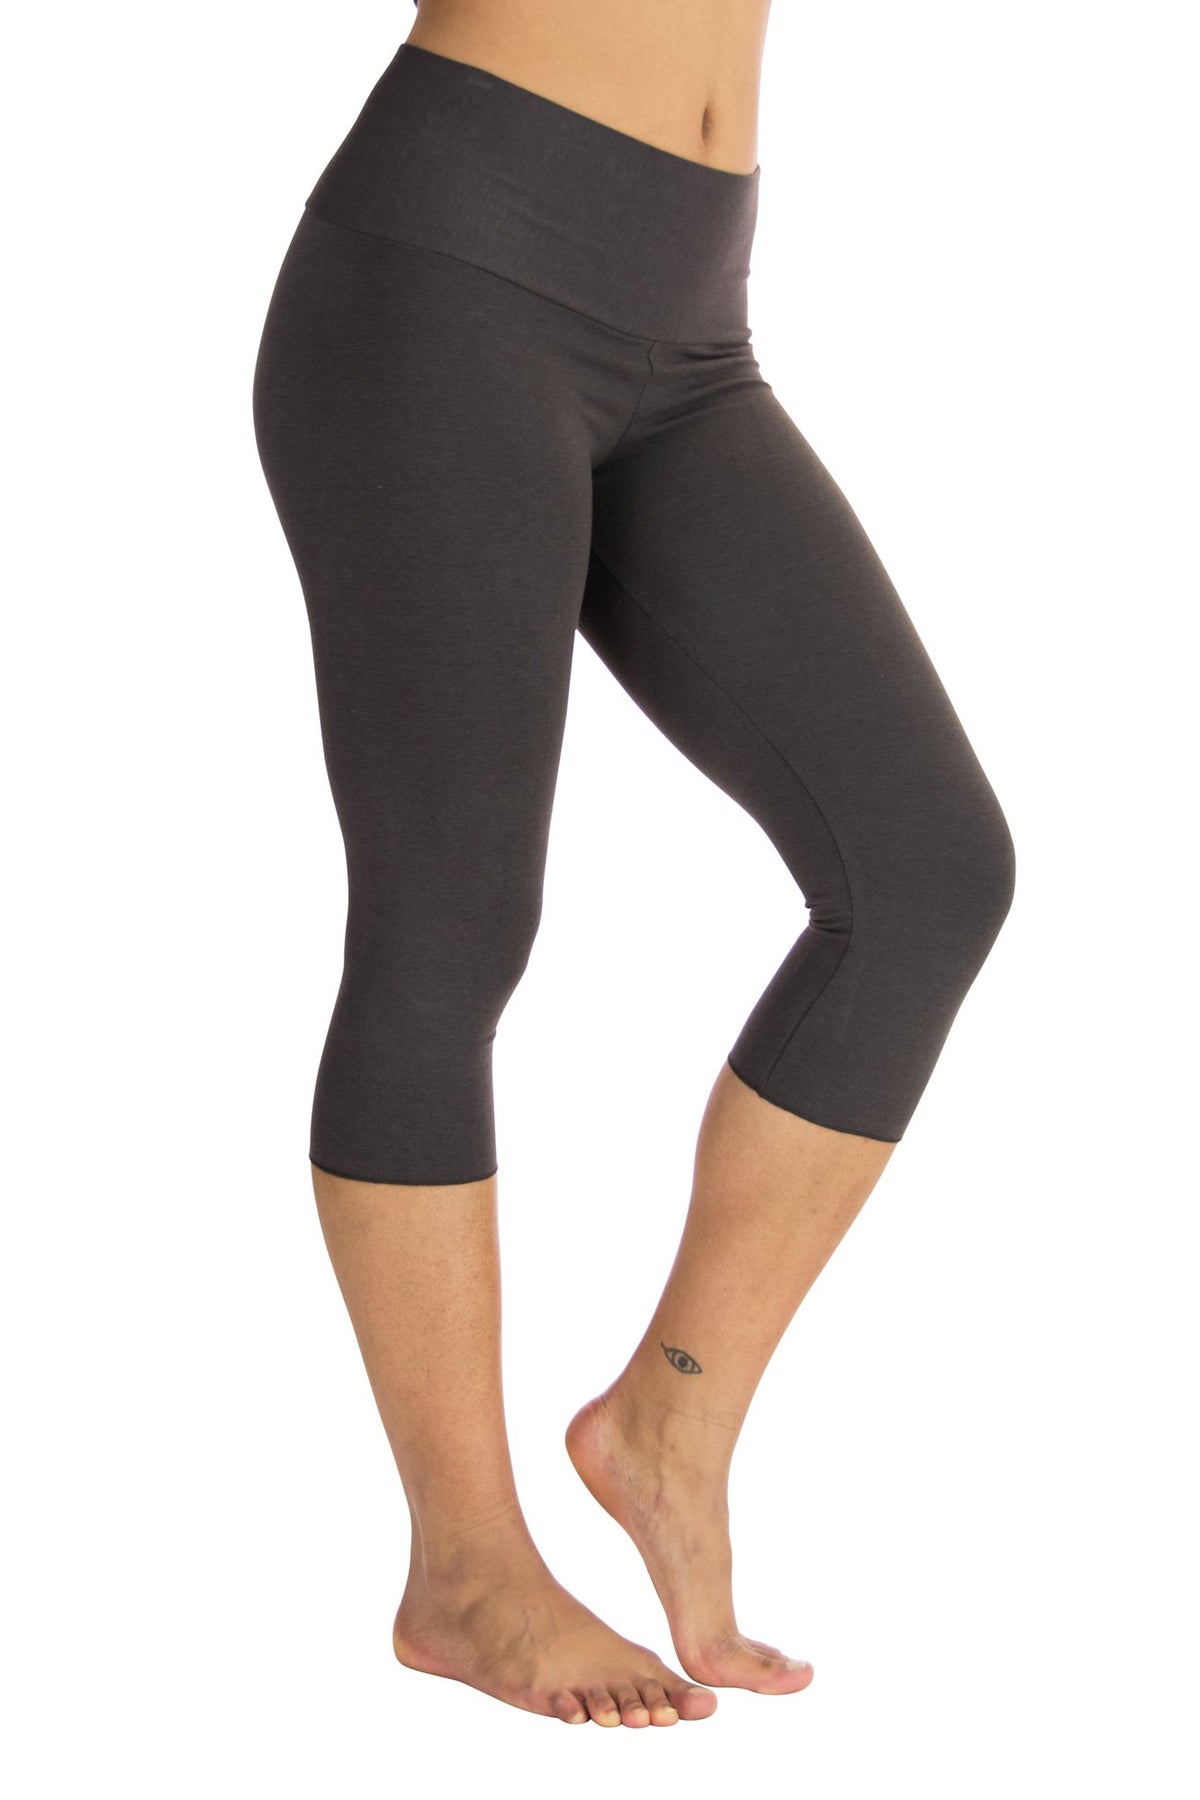 🛑 SOLD Apana Yogi tights  Leggings are not pants, Pants for women, Clothes  design